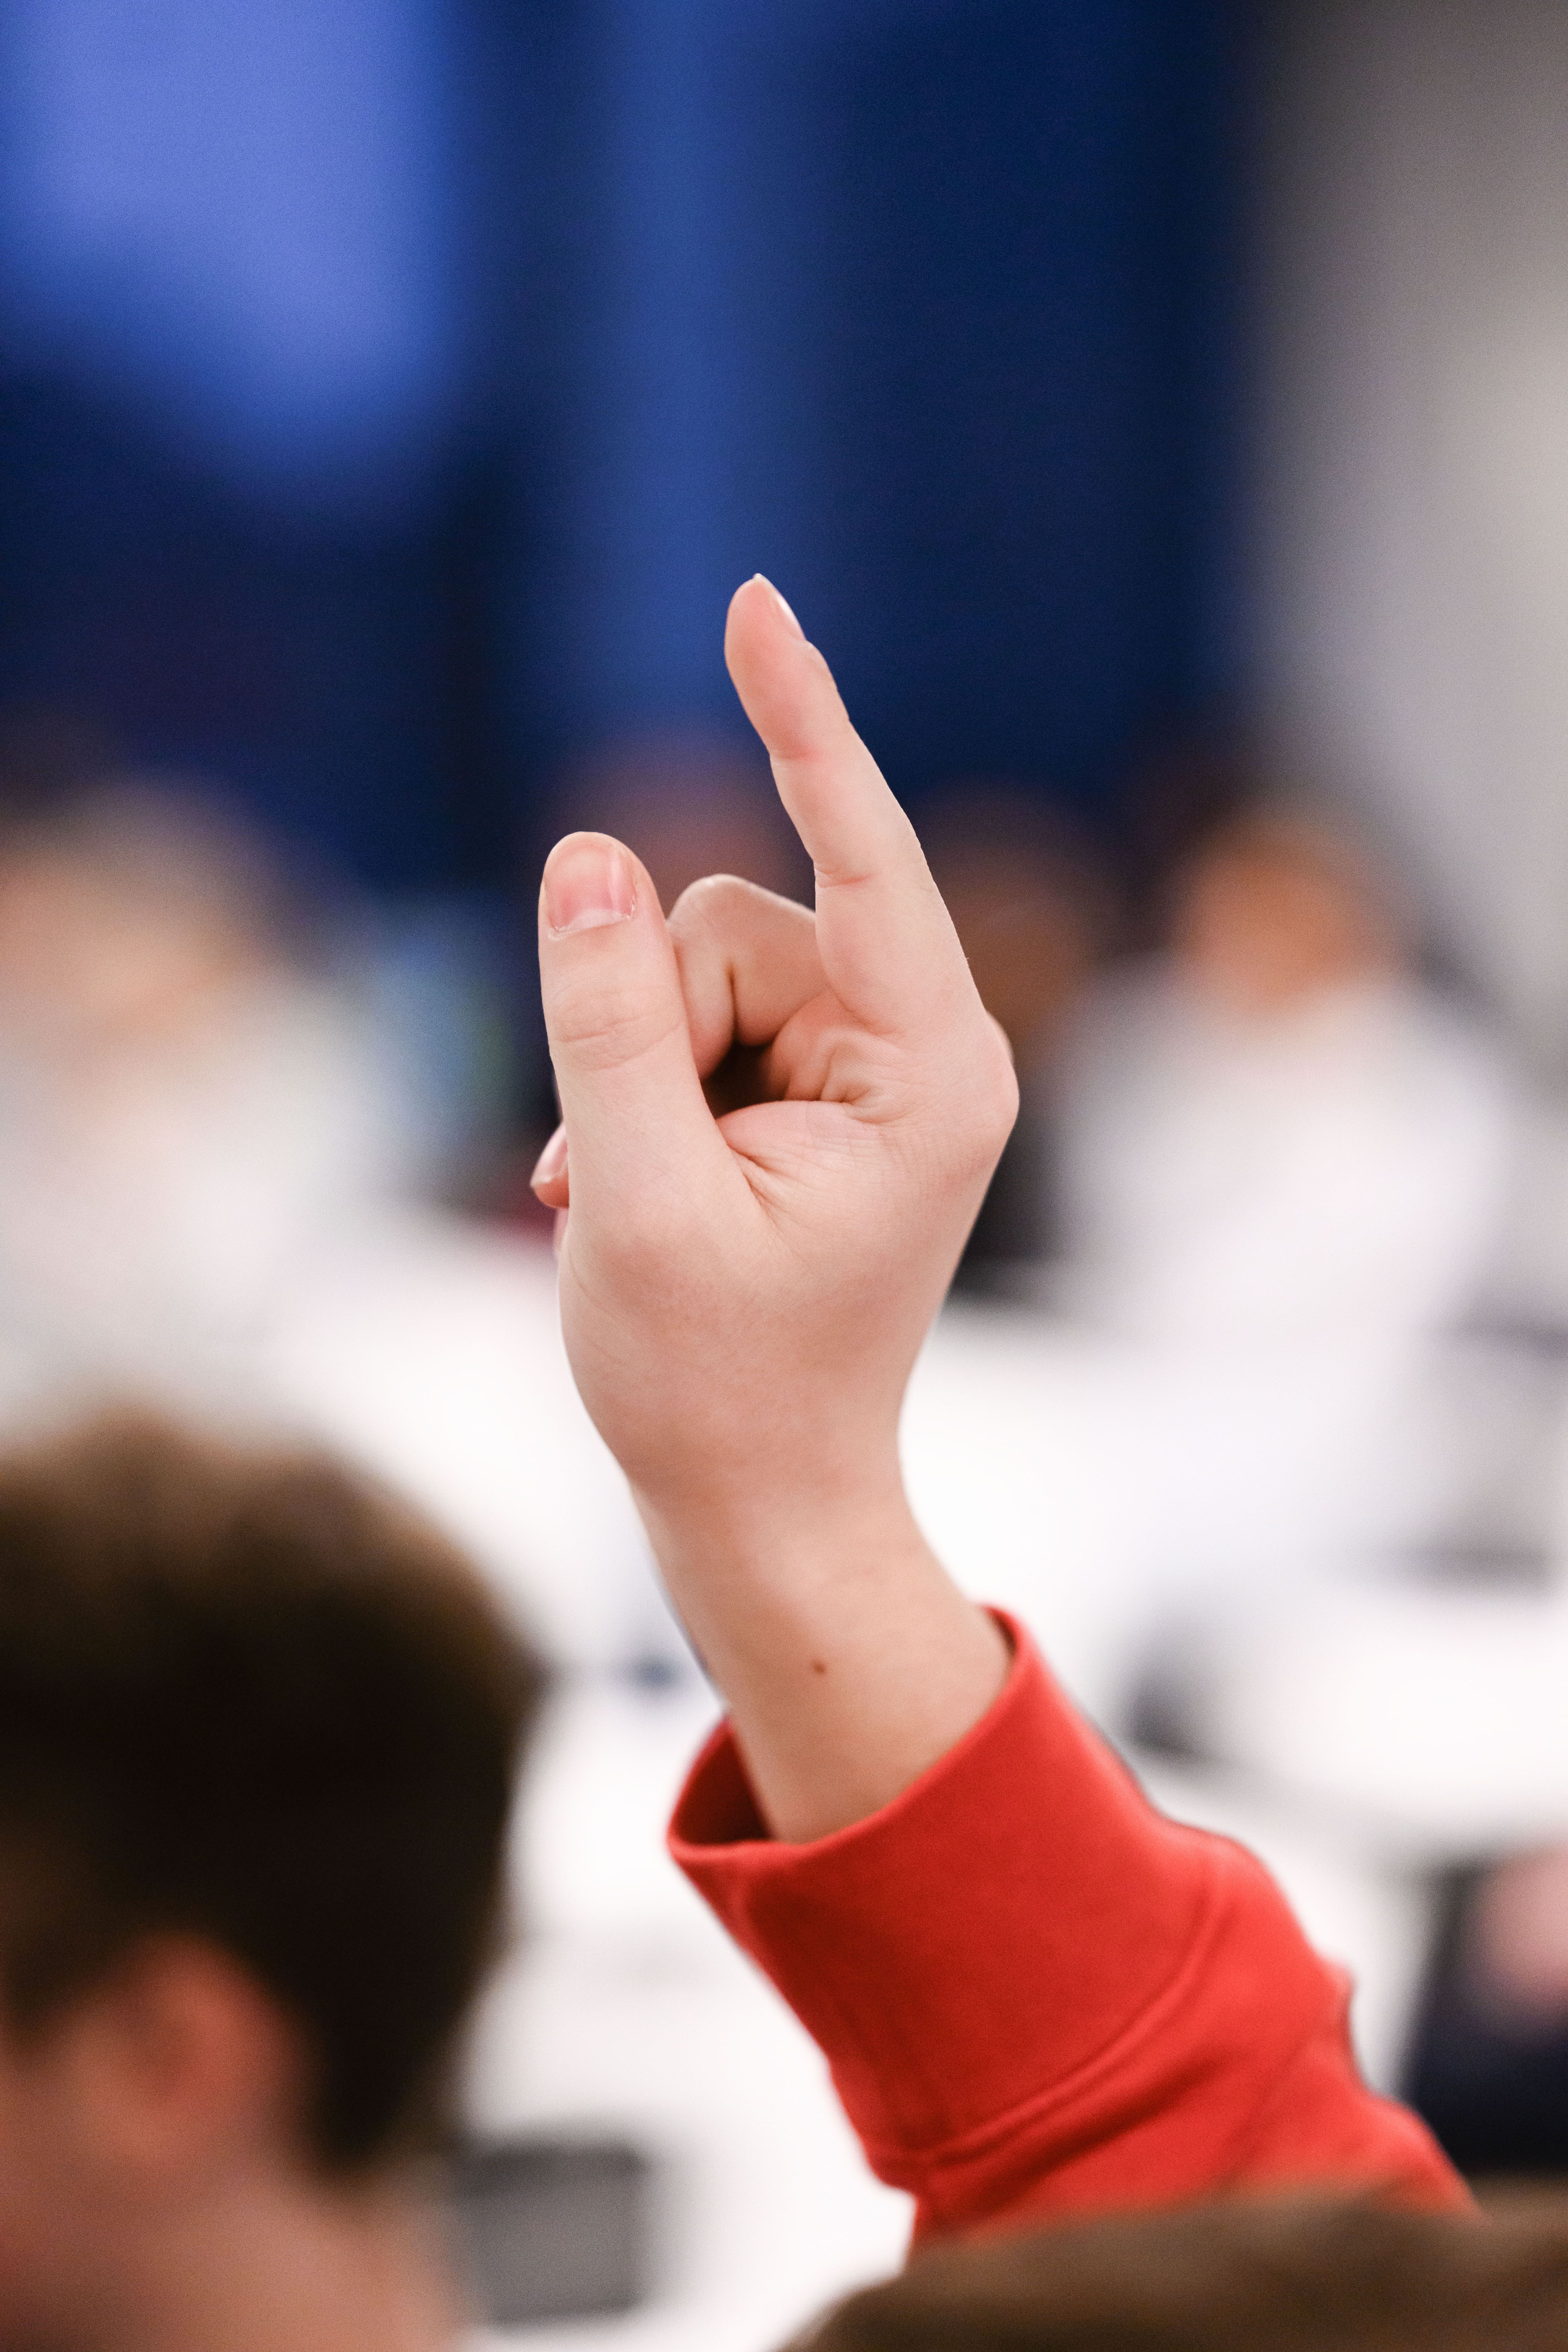 Raised hand with red sleeve. Blurred background.